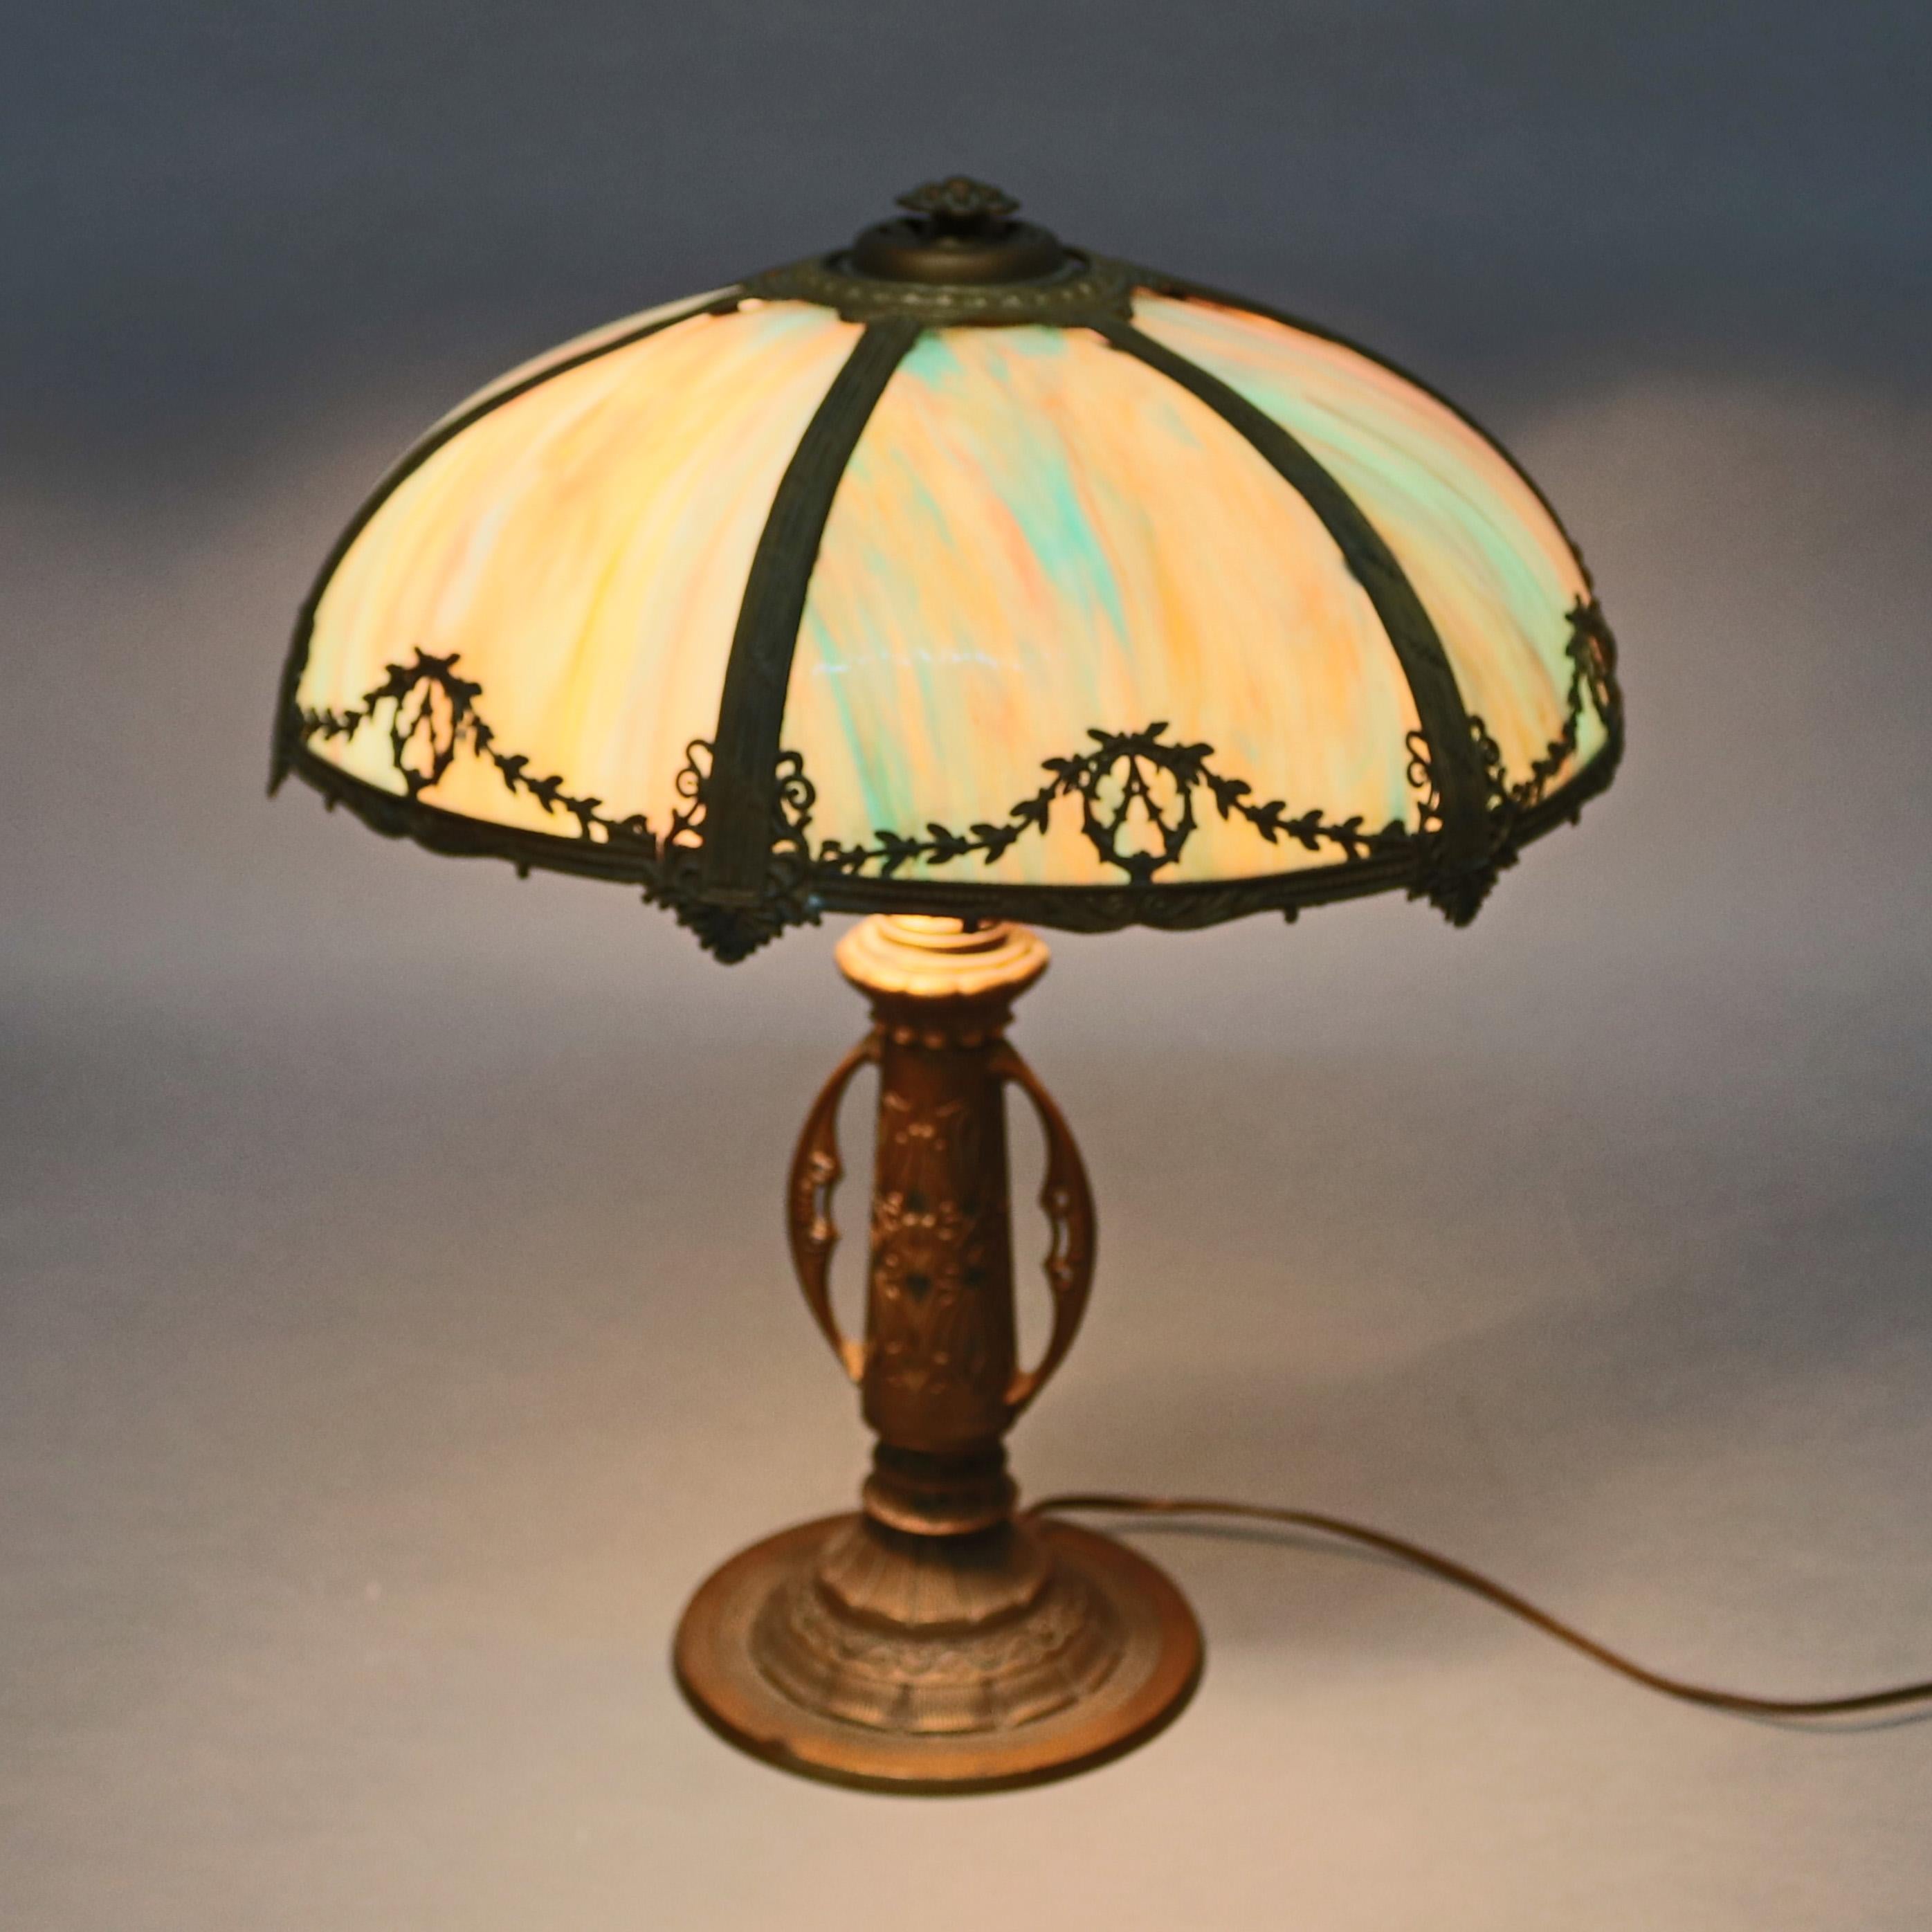 Arts and Crafts Antique Arts & Crafts Slag Glass Table Lamp by Bradley & Hubbard, c1920